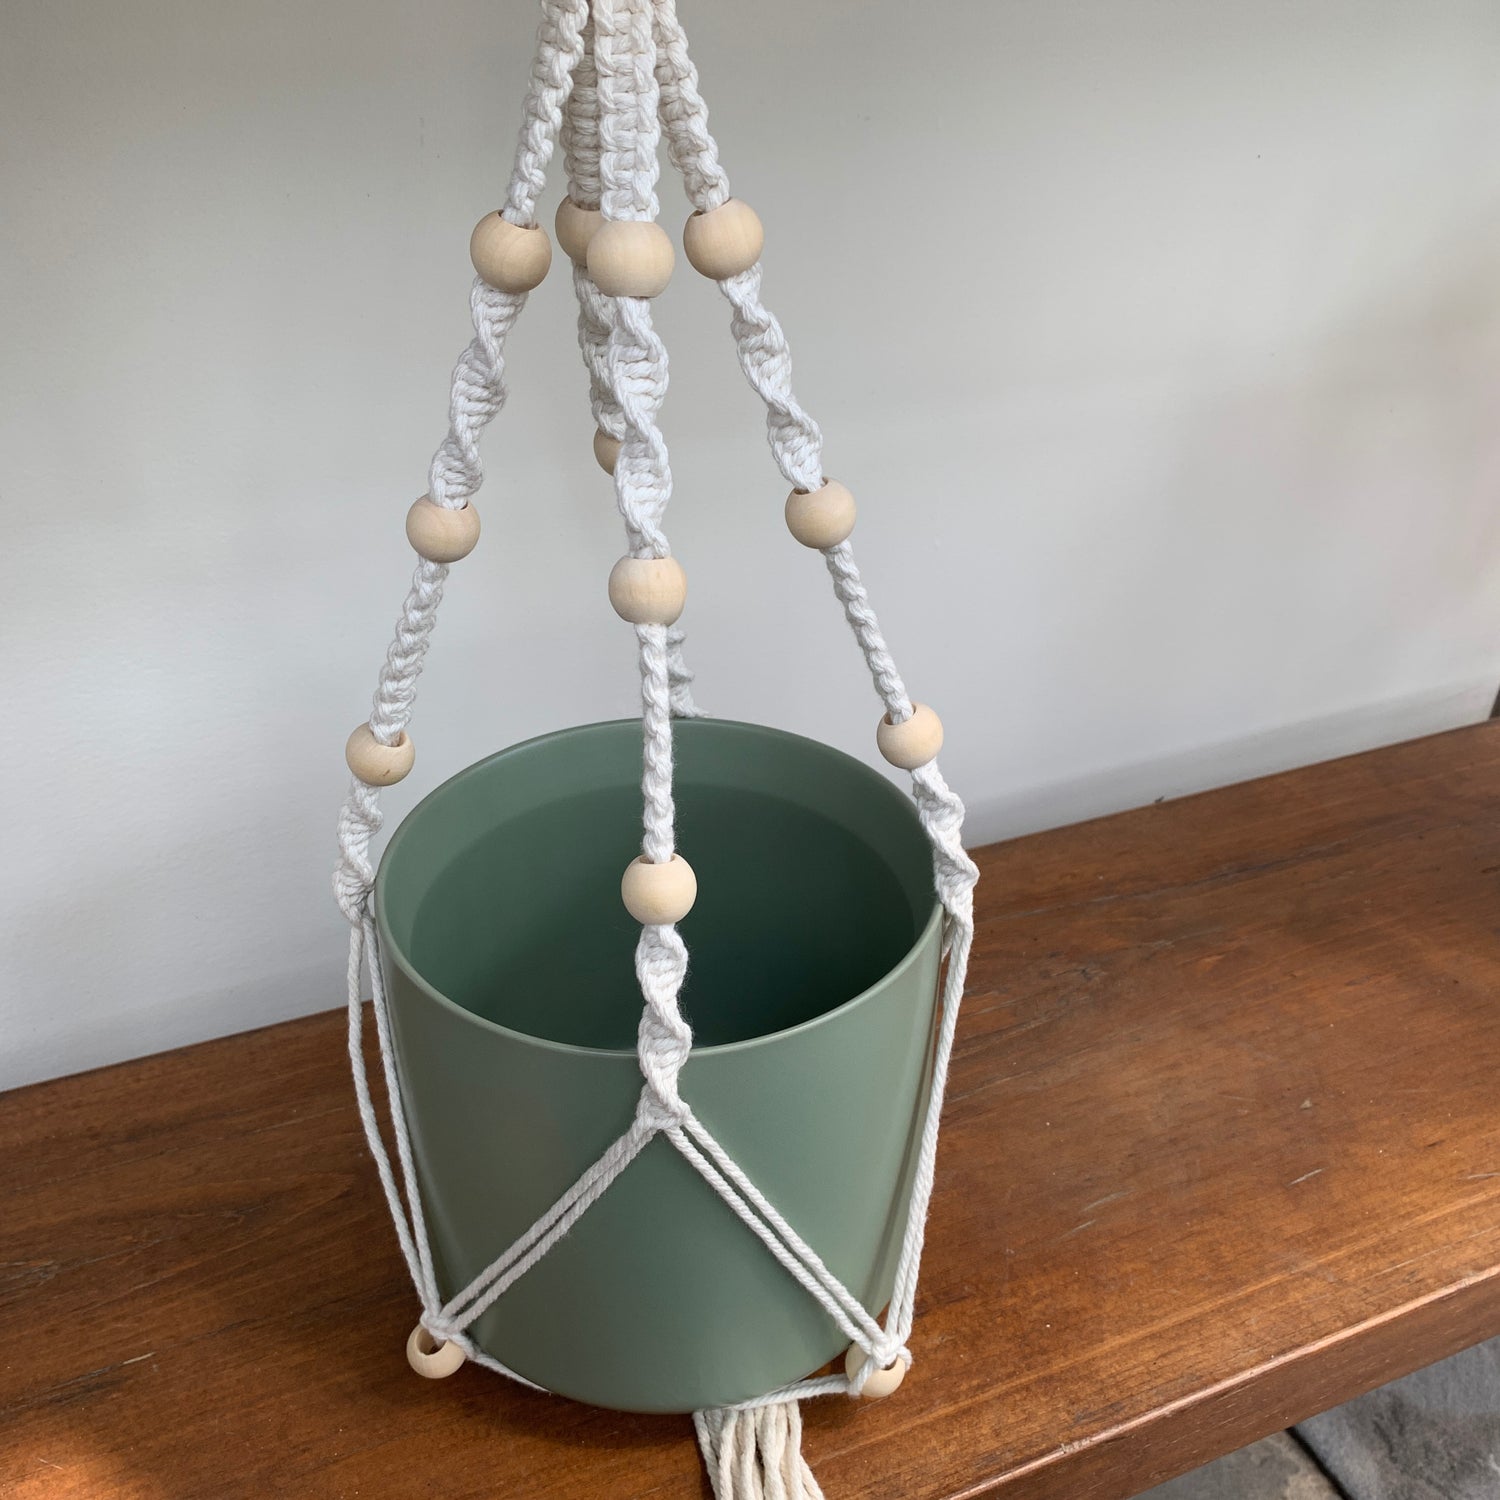 Macrame Planter Hanger with Wooden Beads